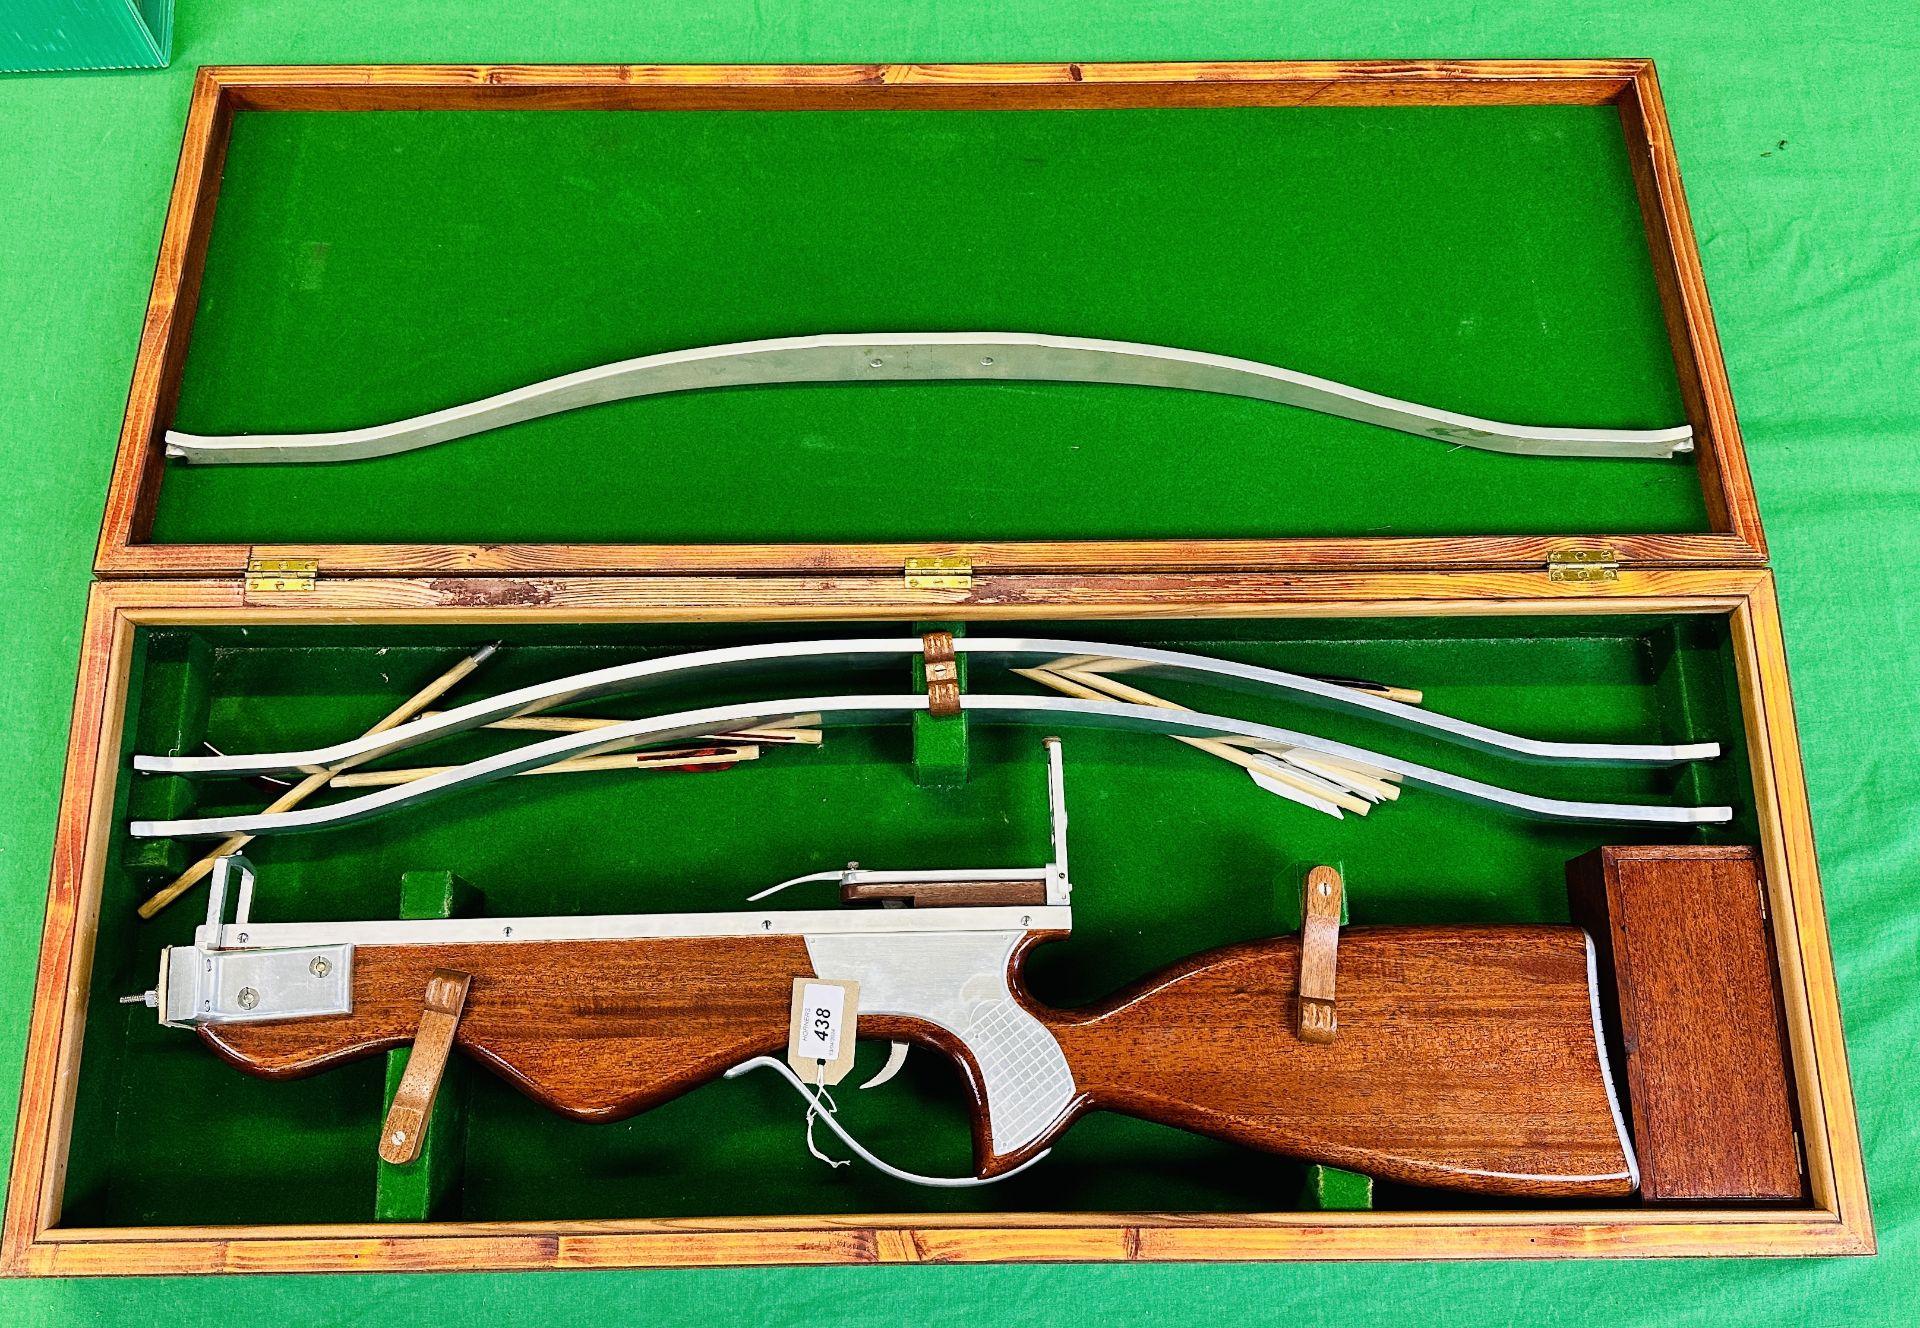 A HANDCRAFTED WOODEN CROSSBOW WITH ALUMINIUM DETAIL IN WOODEN TRANSIT CASE - NO POSTAGE OR PACKING